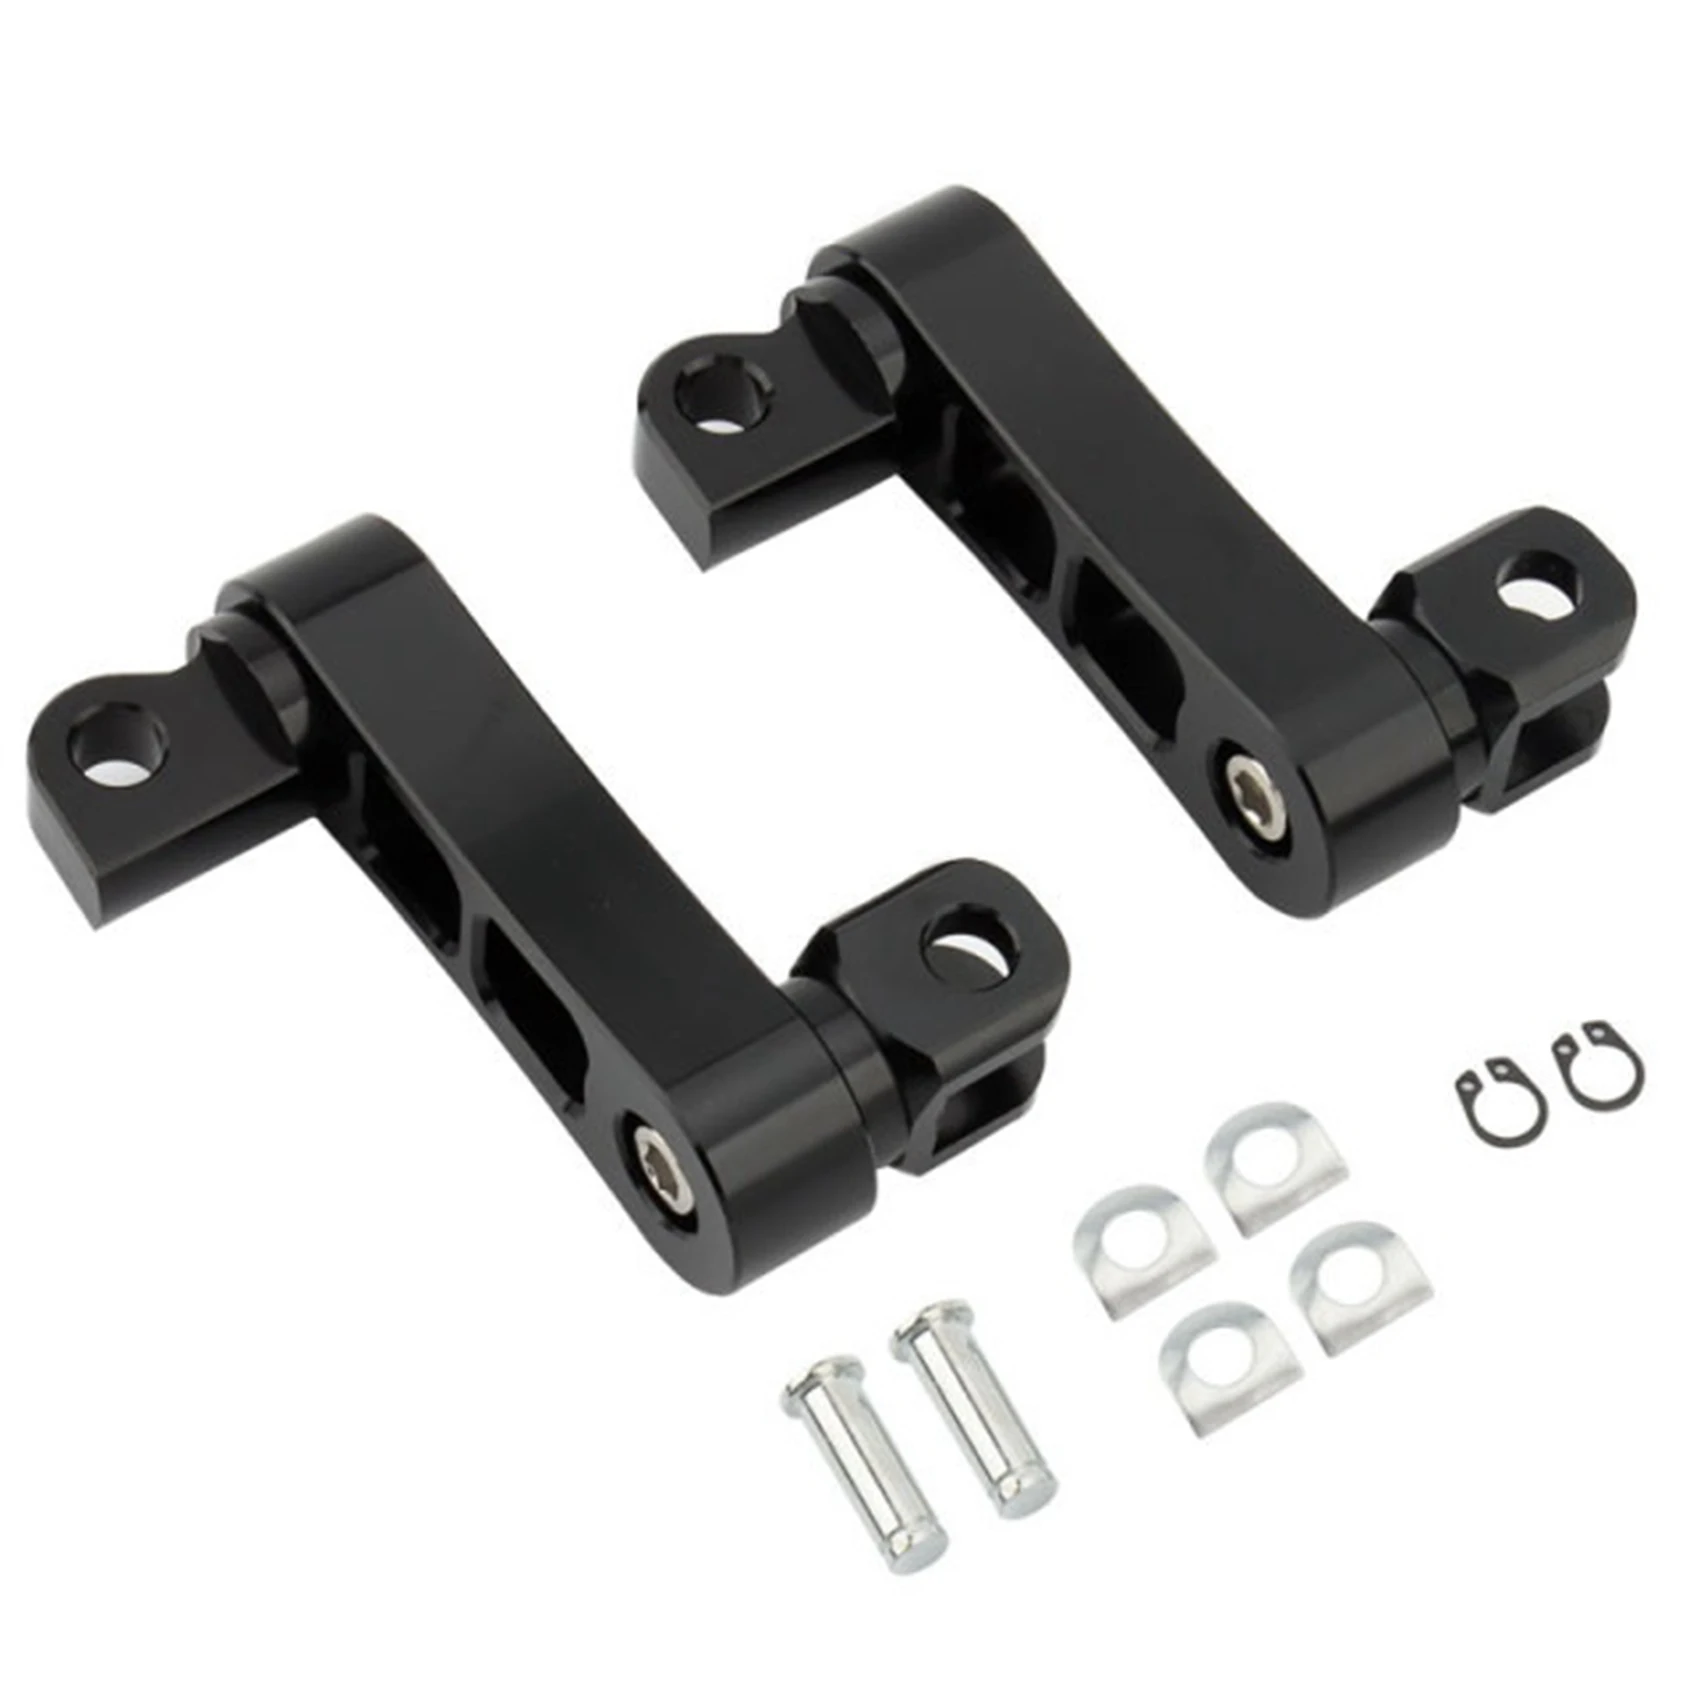 

Motorcycle Adjustable P enger Footpegs Highway Pegs Male Mount Foot Peg Clamp Support Extensions Bracket B